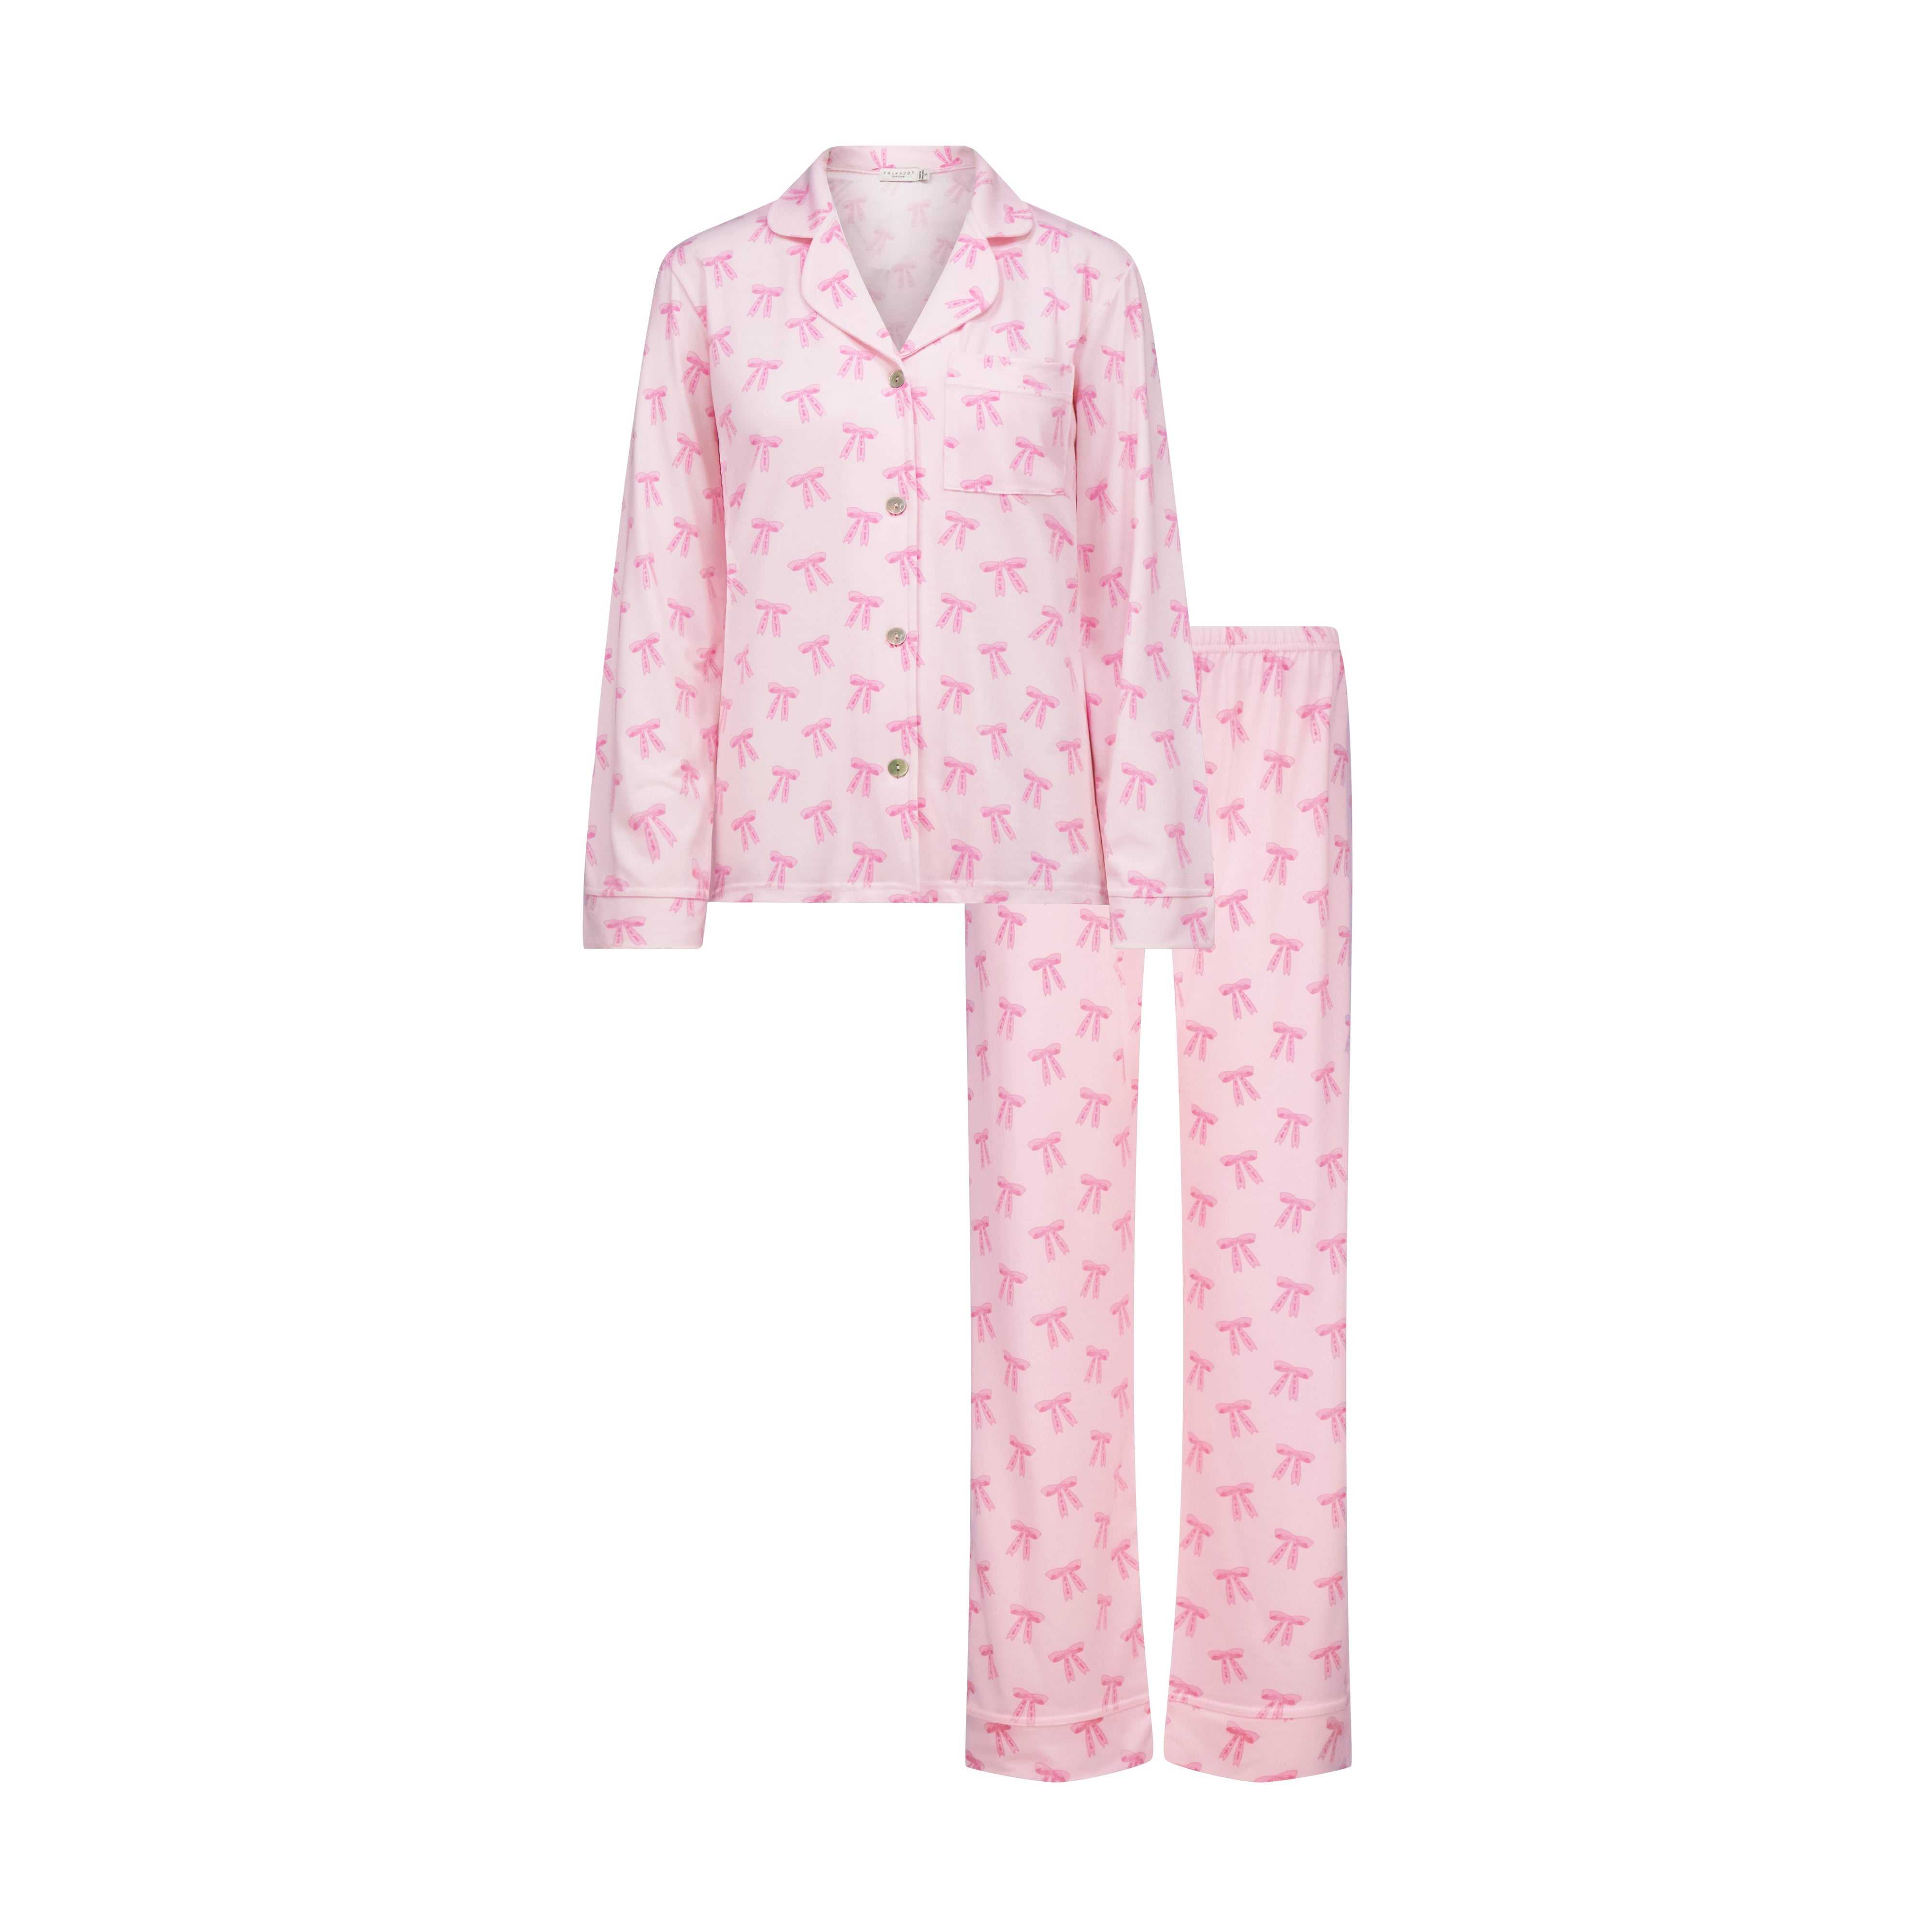 CHARLEY Pajama Set in Forever Love Bow Print -NEW COLOR